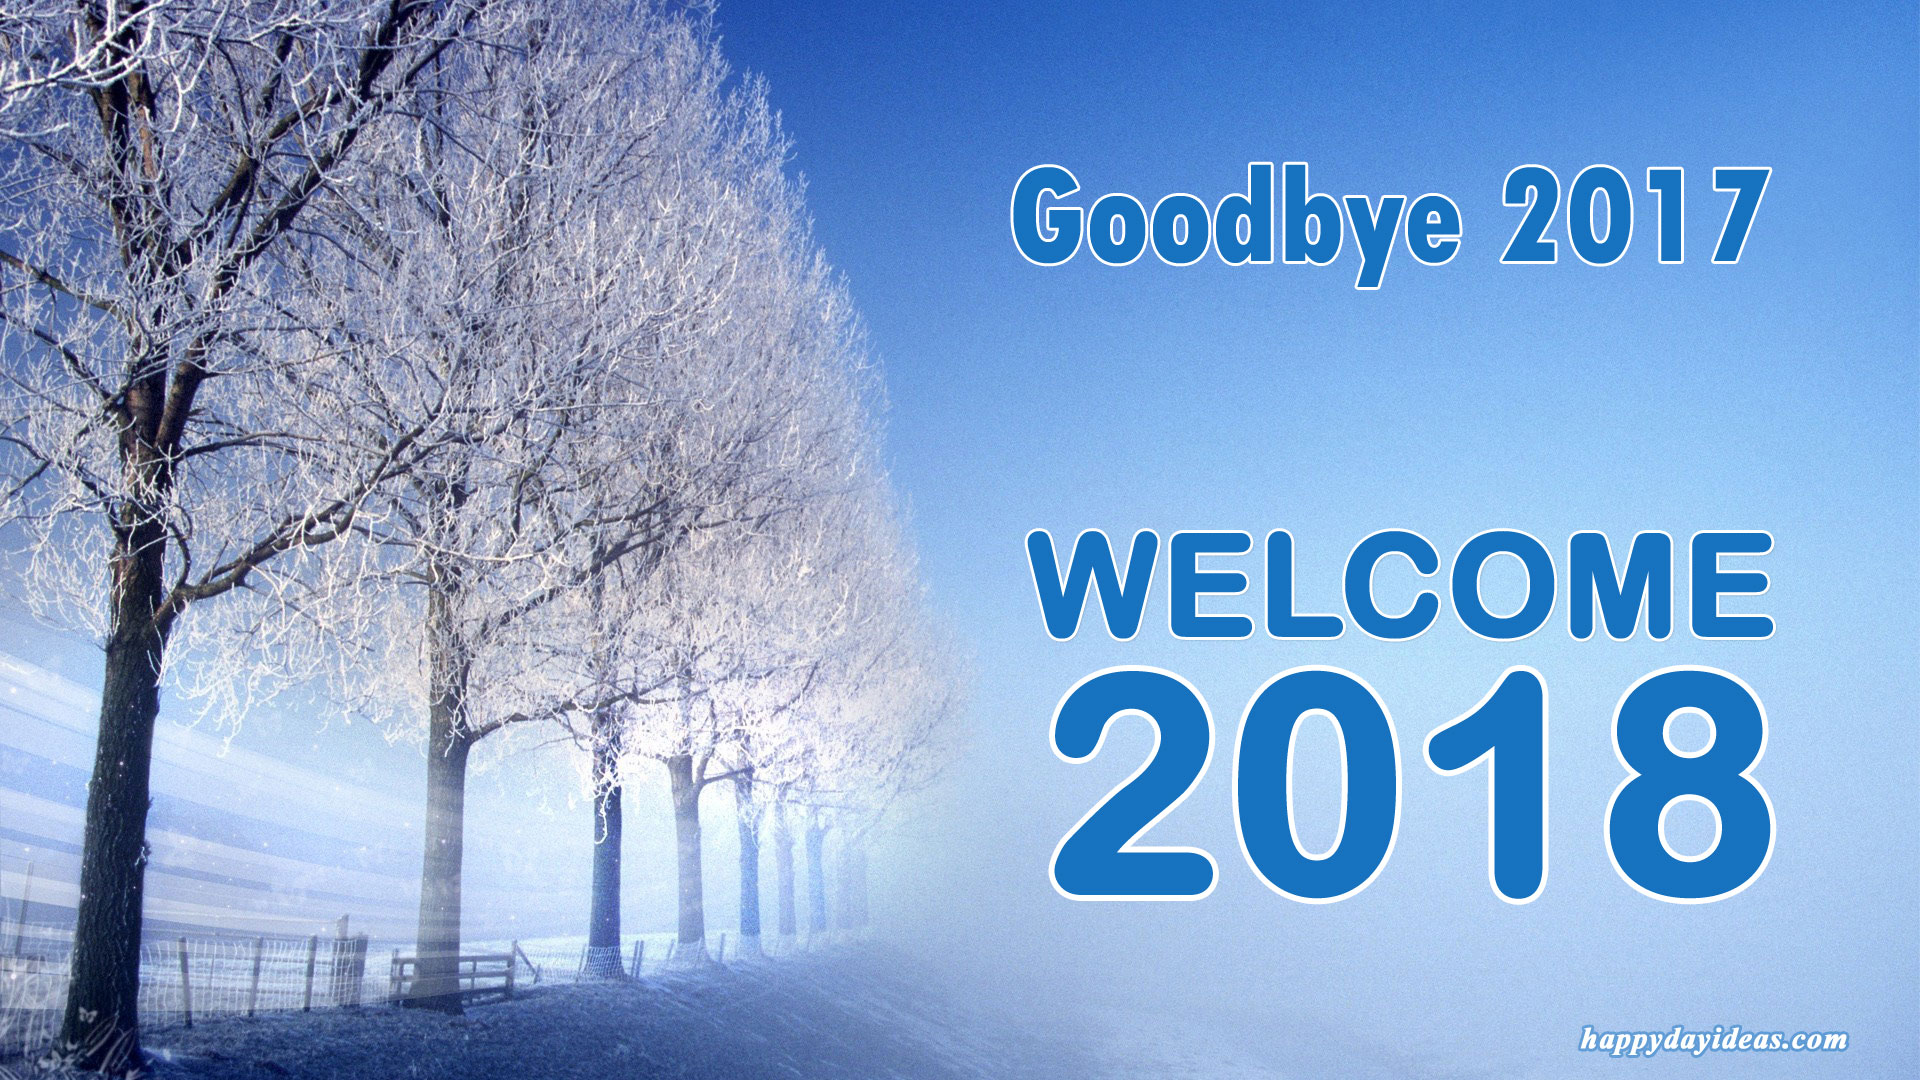 Goodbye Wele Image Wallpaper And Quotes